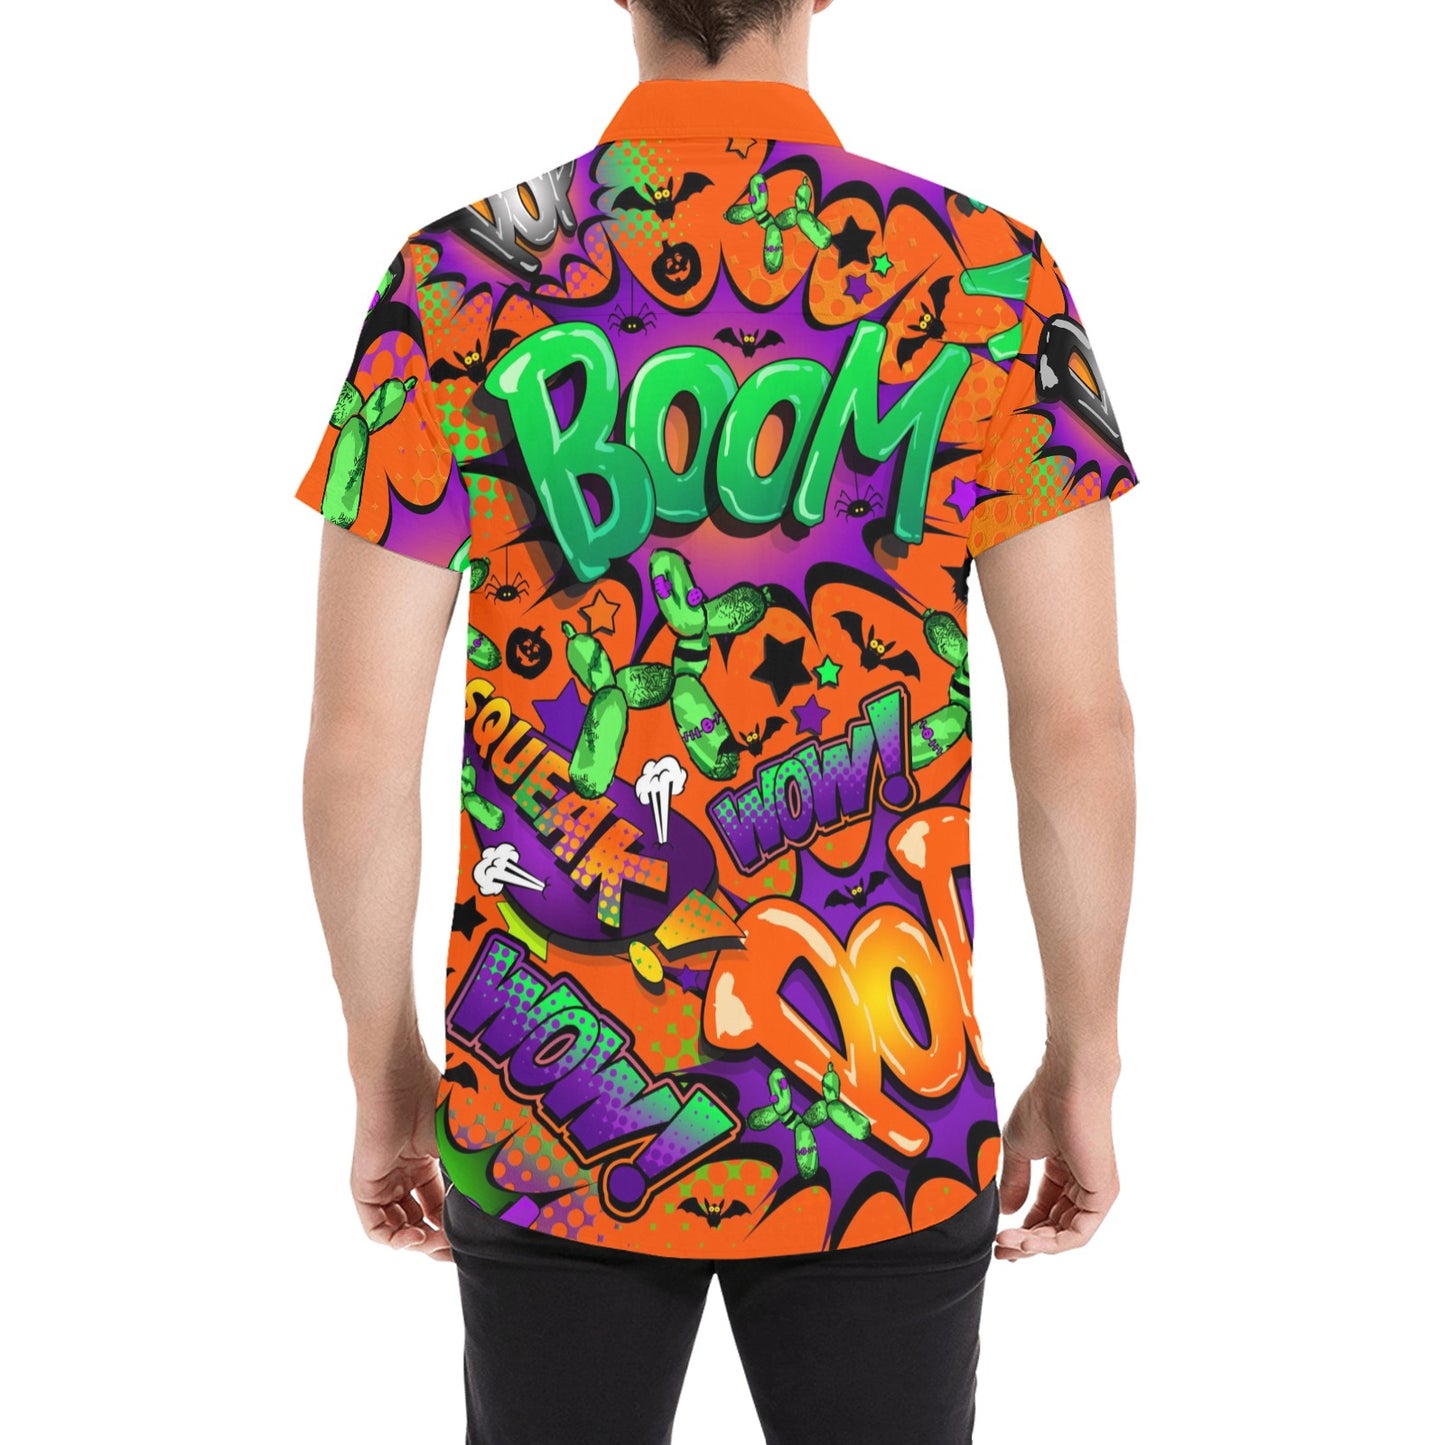 Orange Halloween Shirt with balloon dogs and more